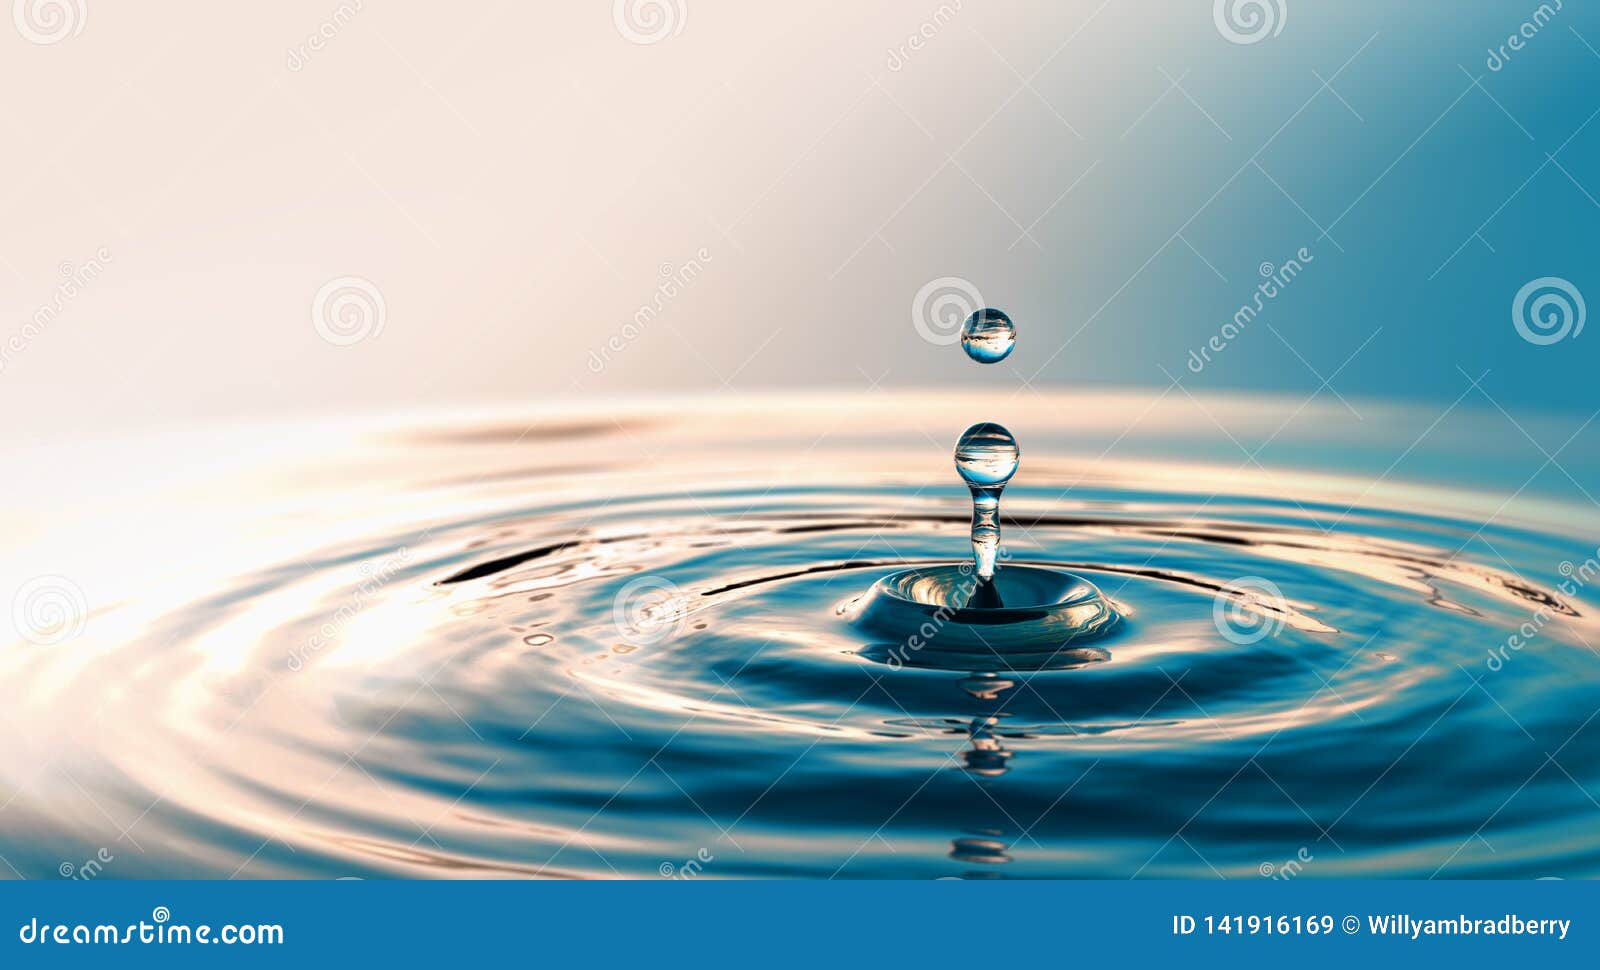 clear water drop with circular waves